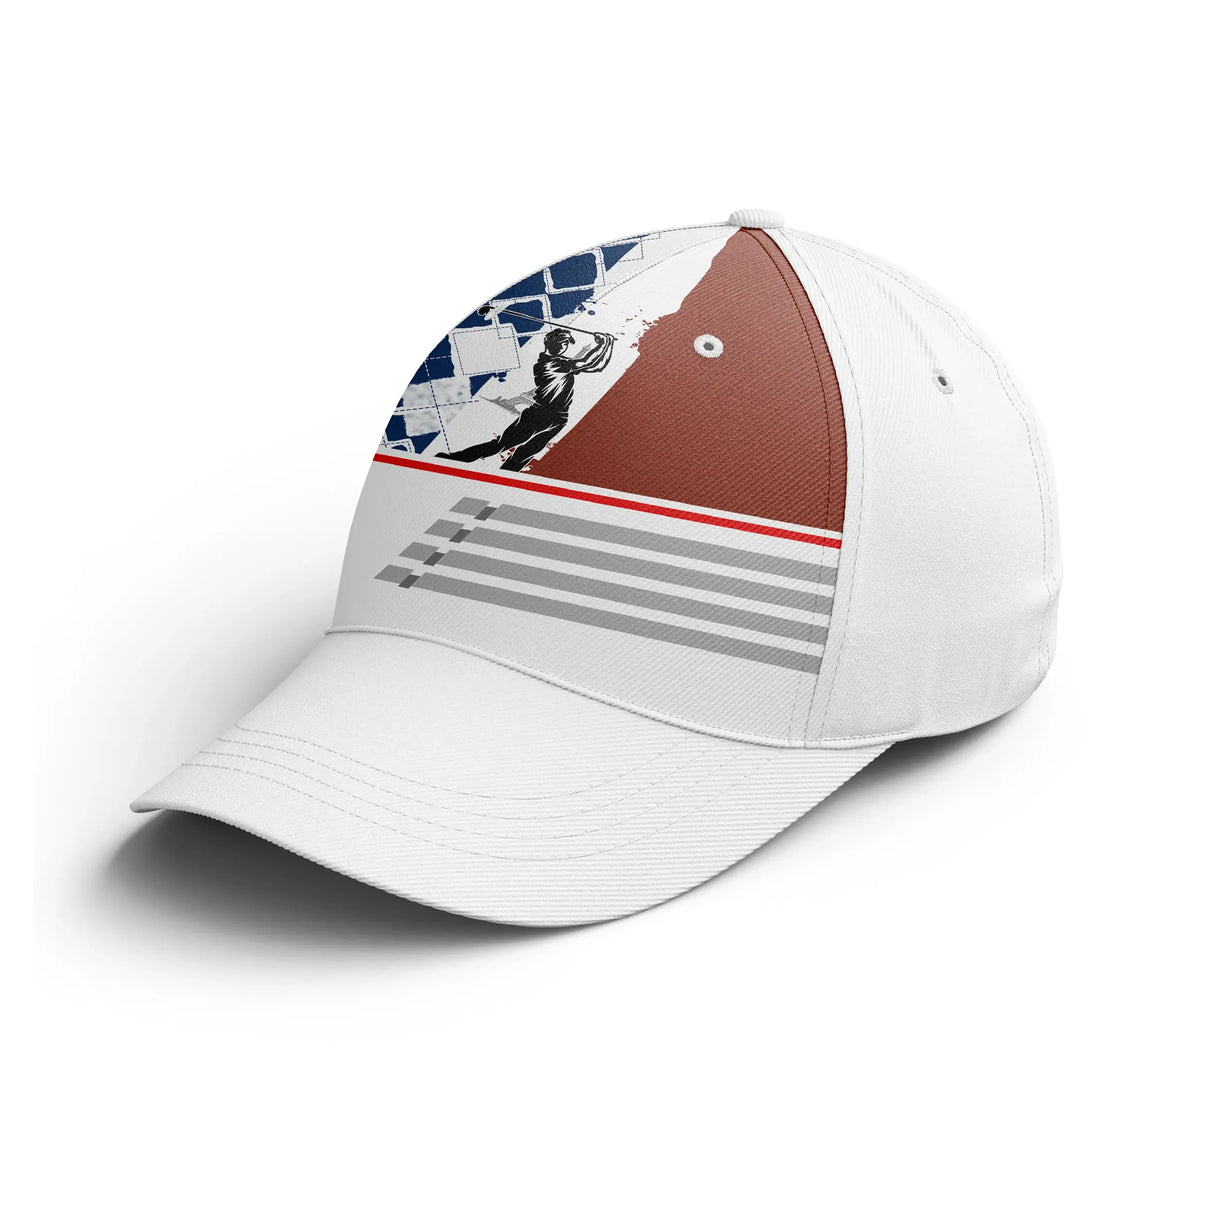 Personalized Golf Performance Cap, Original Gift for Golf Fans, France Flag, Golfer - CT01092218